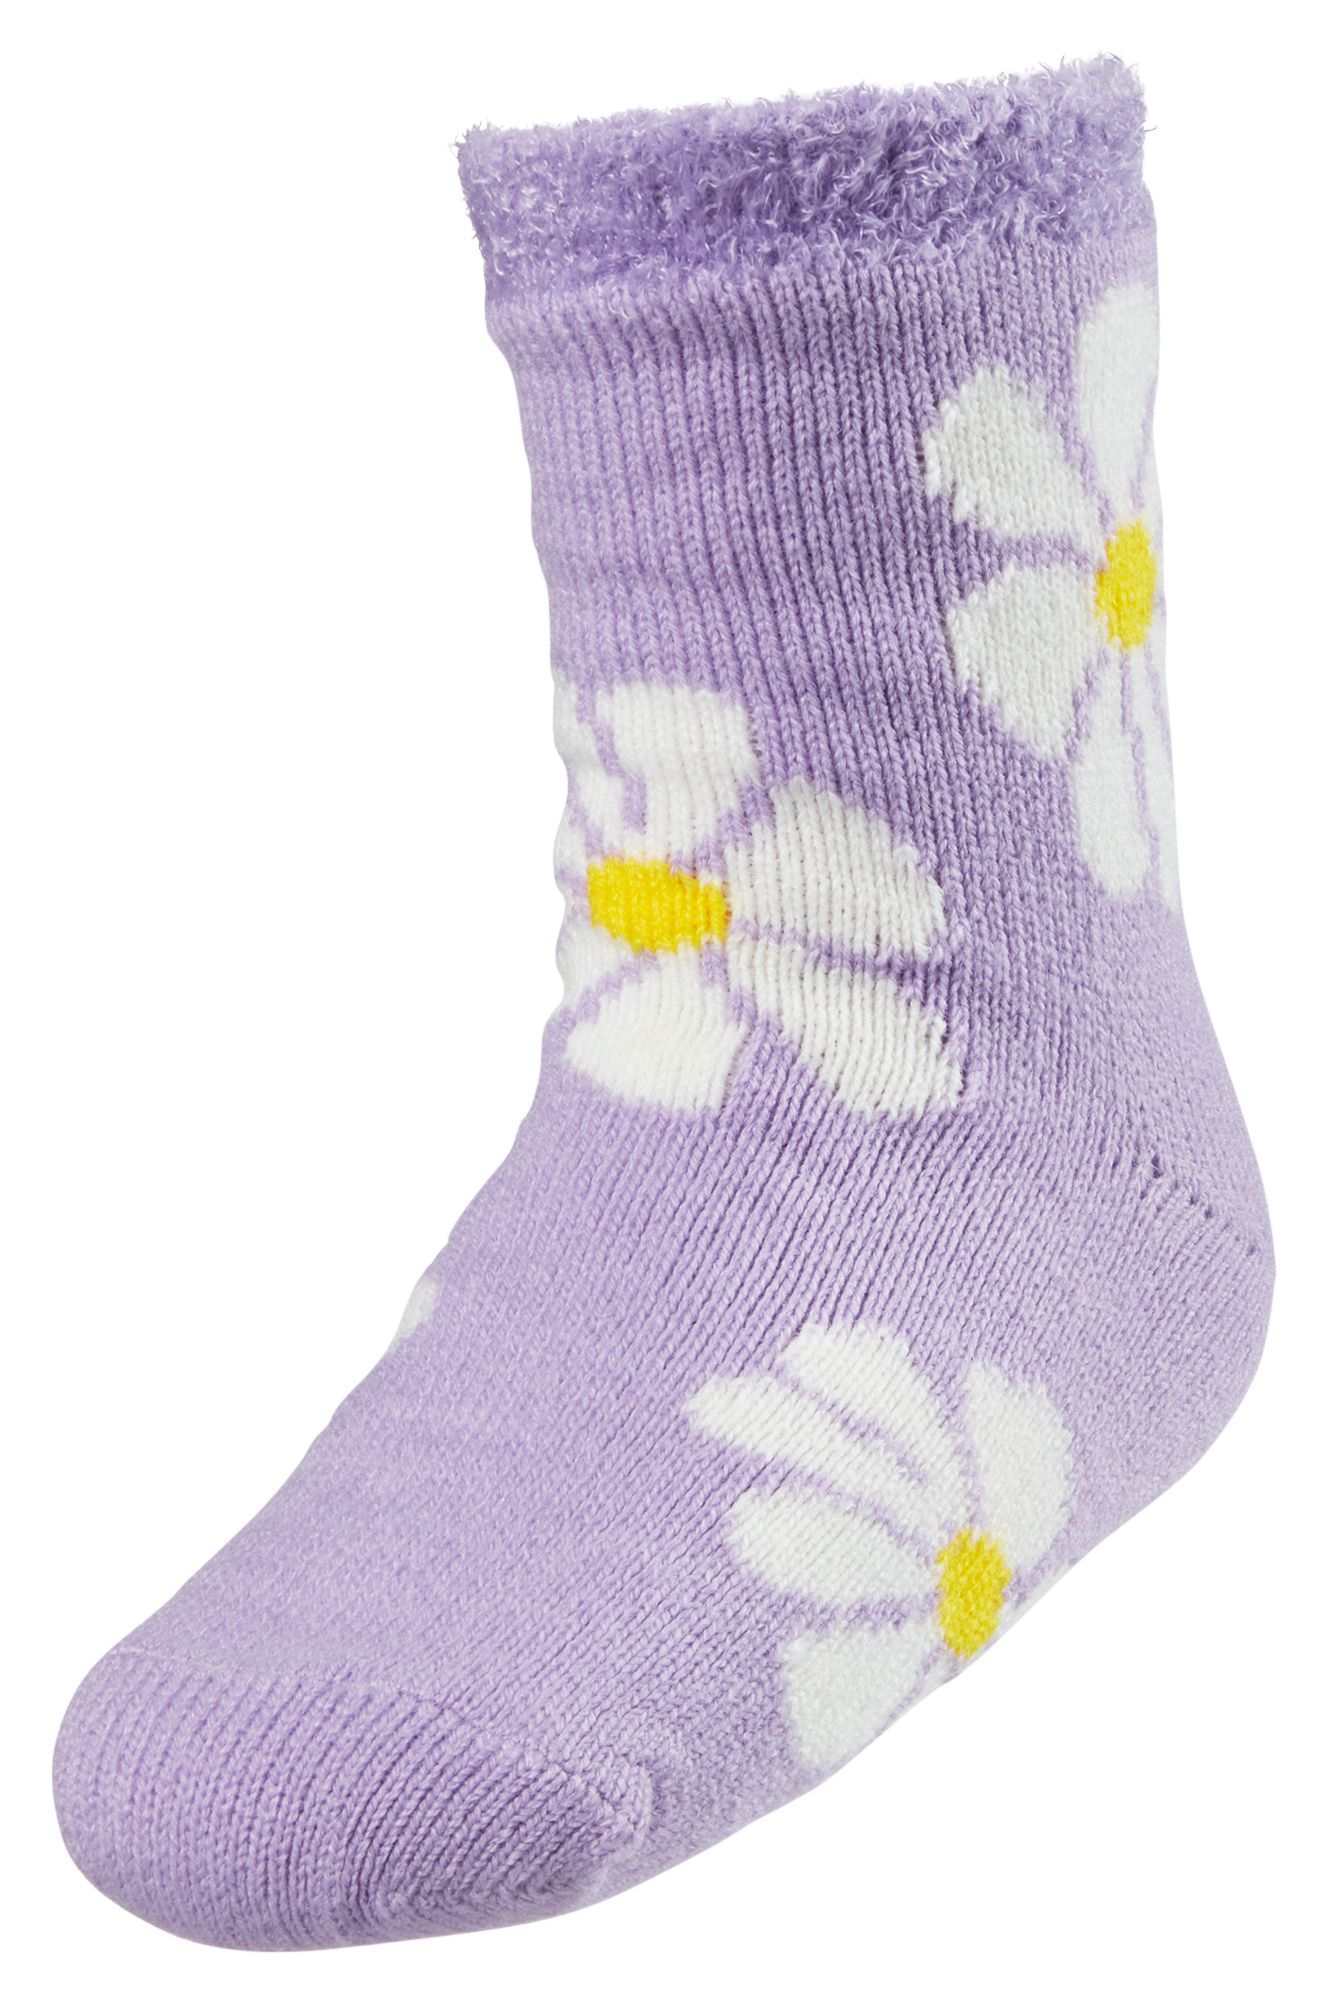 Northeast Outfitters Girls' Cozy Cabin Daisy Socks